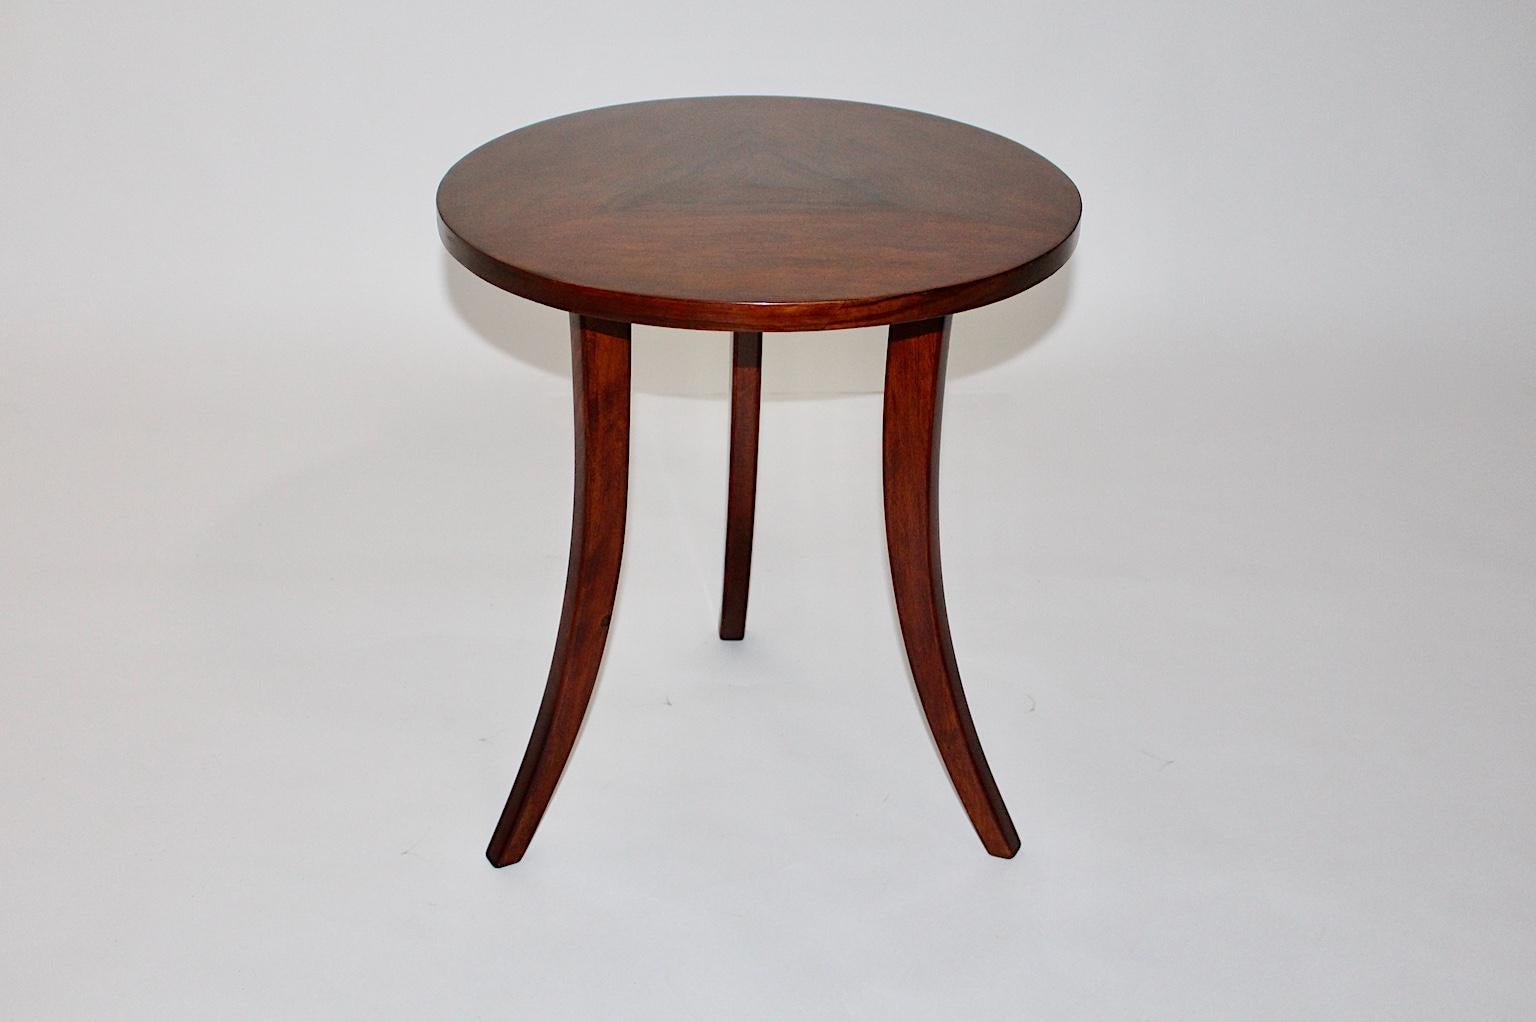 Josef Frank for Haus & Garten Art Deco vintage walnut side table, which was designed and manufactured circa 1925 in Vienna.
The cute side table shows three slightly curved solid walnut legs and a walnut veneered top. The veneered top features a